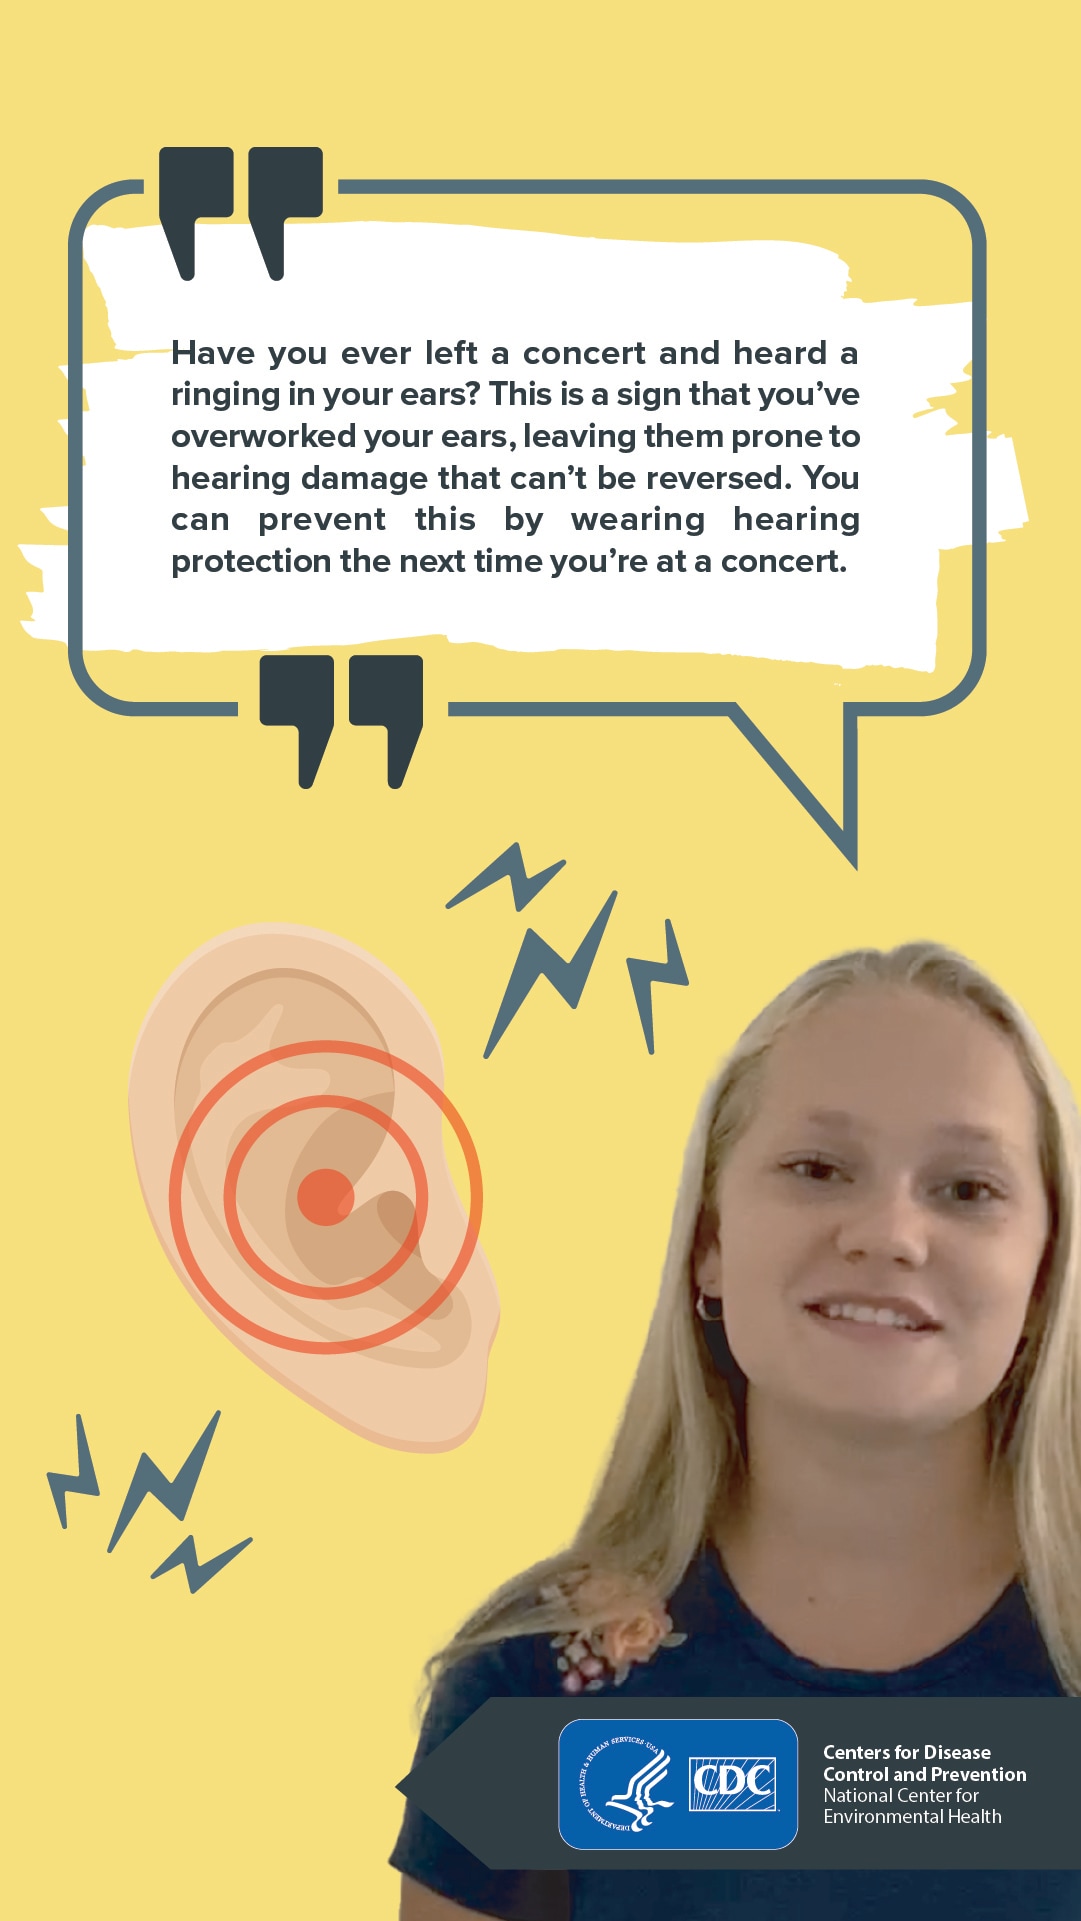 If we want to protect our ears from noise-induced hearing loss, we must start listening safely. This means paying more attention to how we’re listening through headphones.